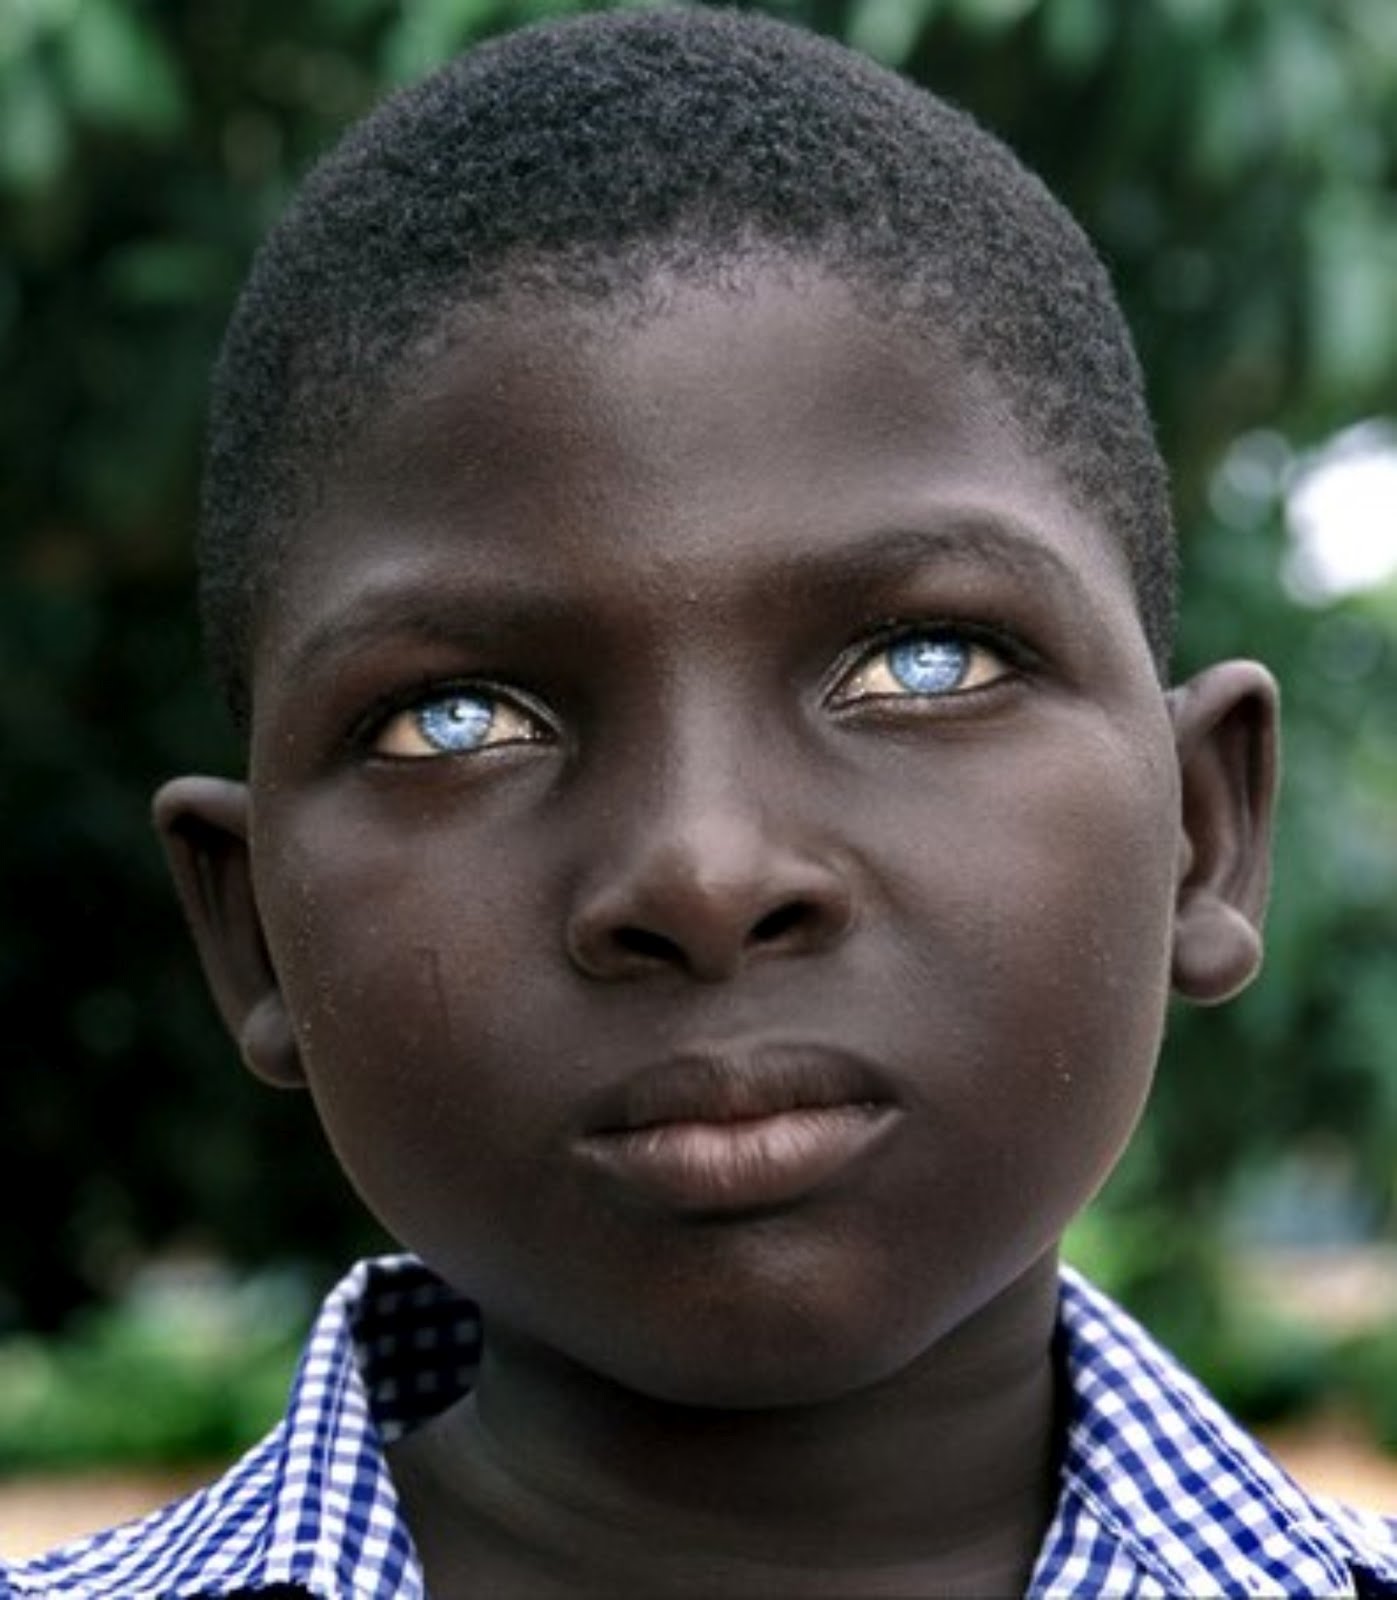 Acting White Acting Black Healthy African Boy With Rare Blue Eyes